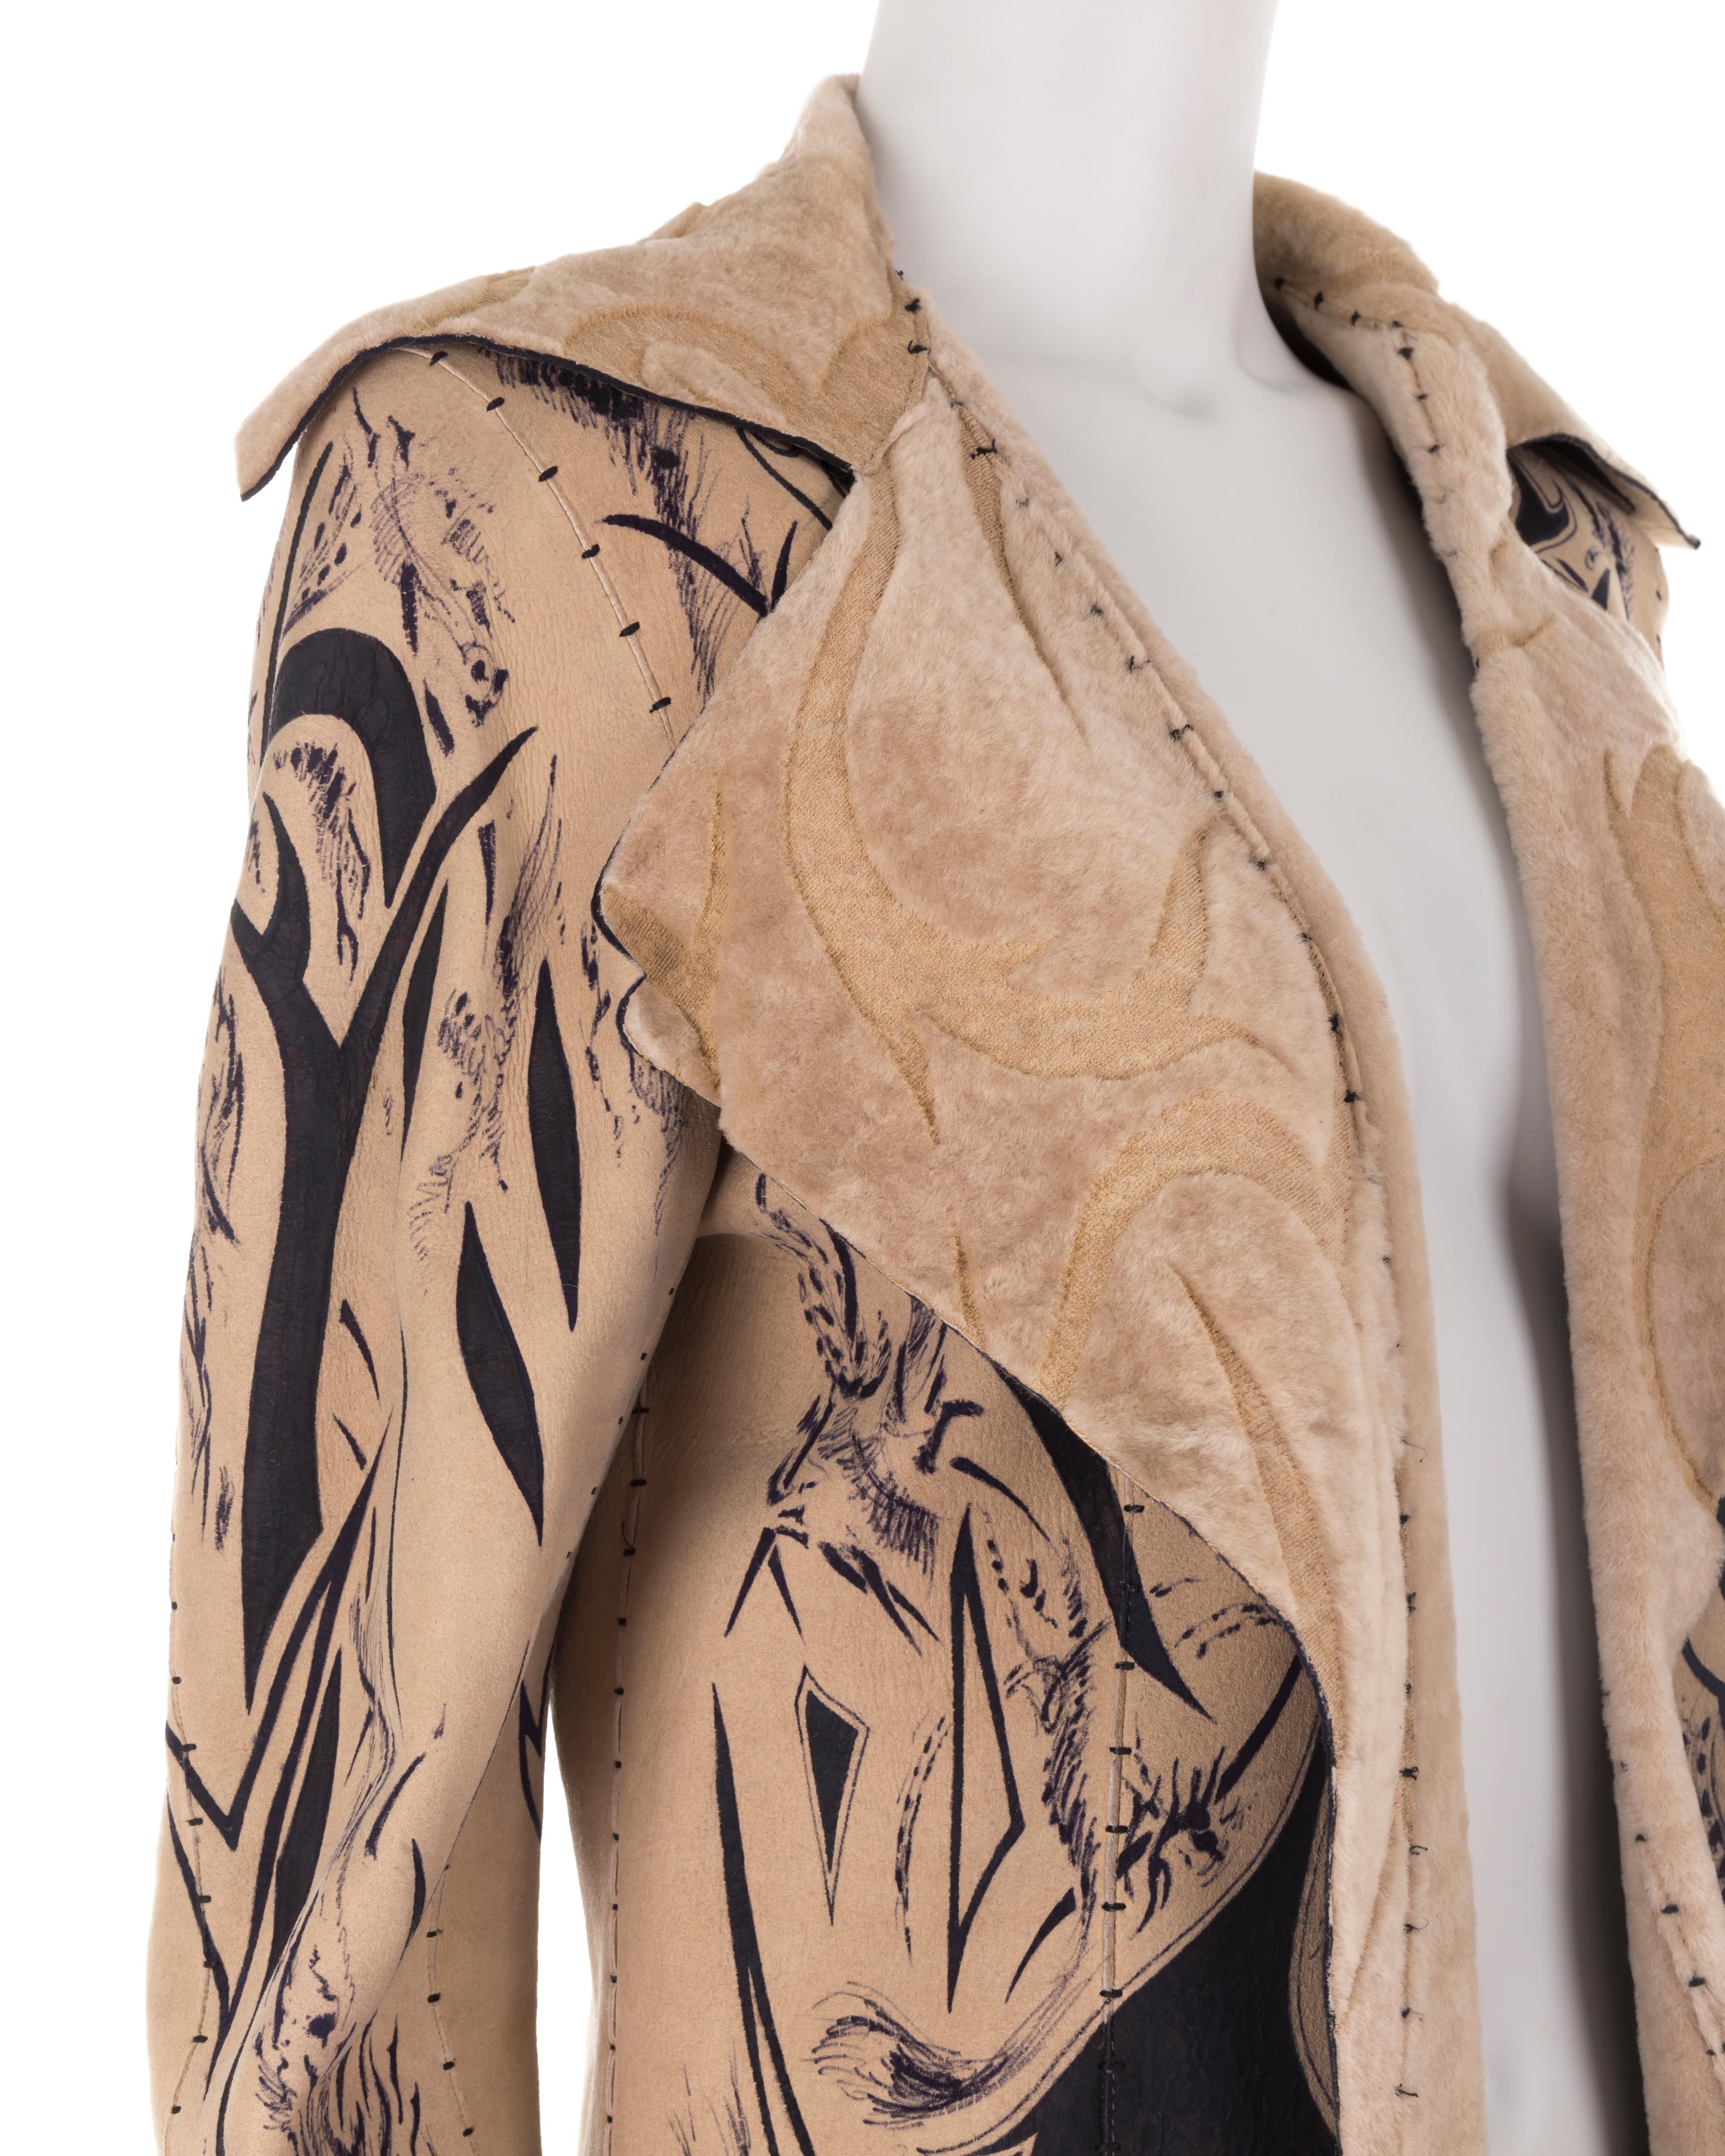 Roberto Cavalli F/W 1999 runway sample hand-painted leather jacket and skirt set For Sale 4